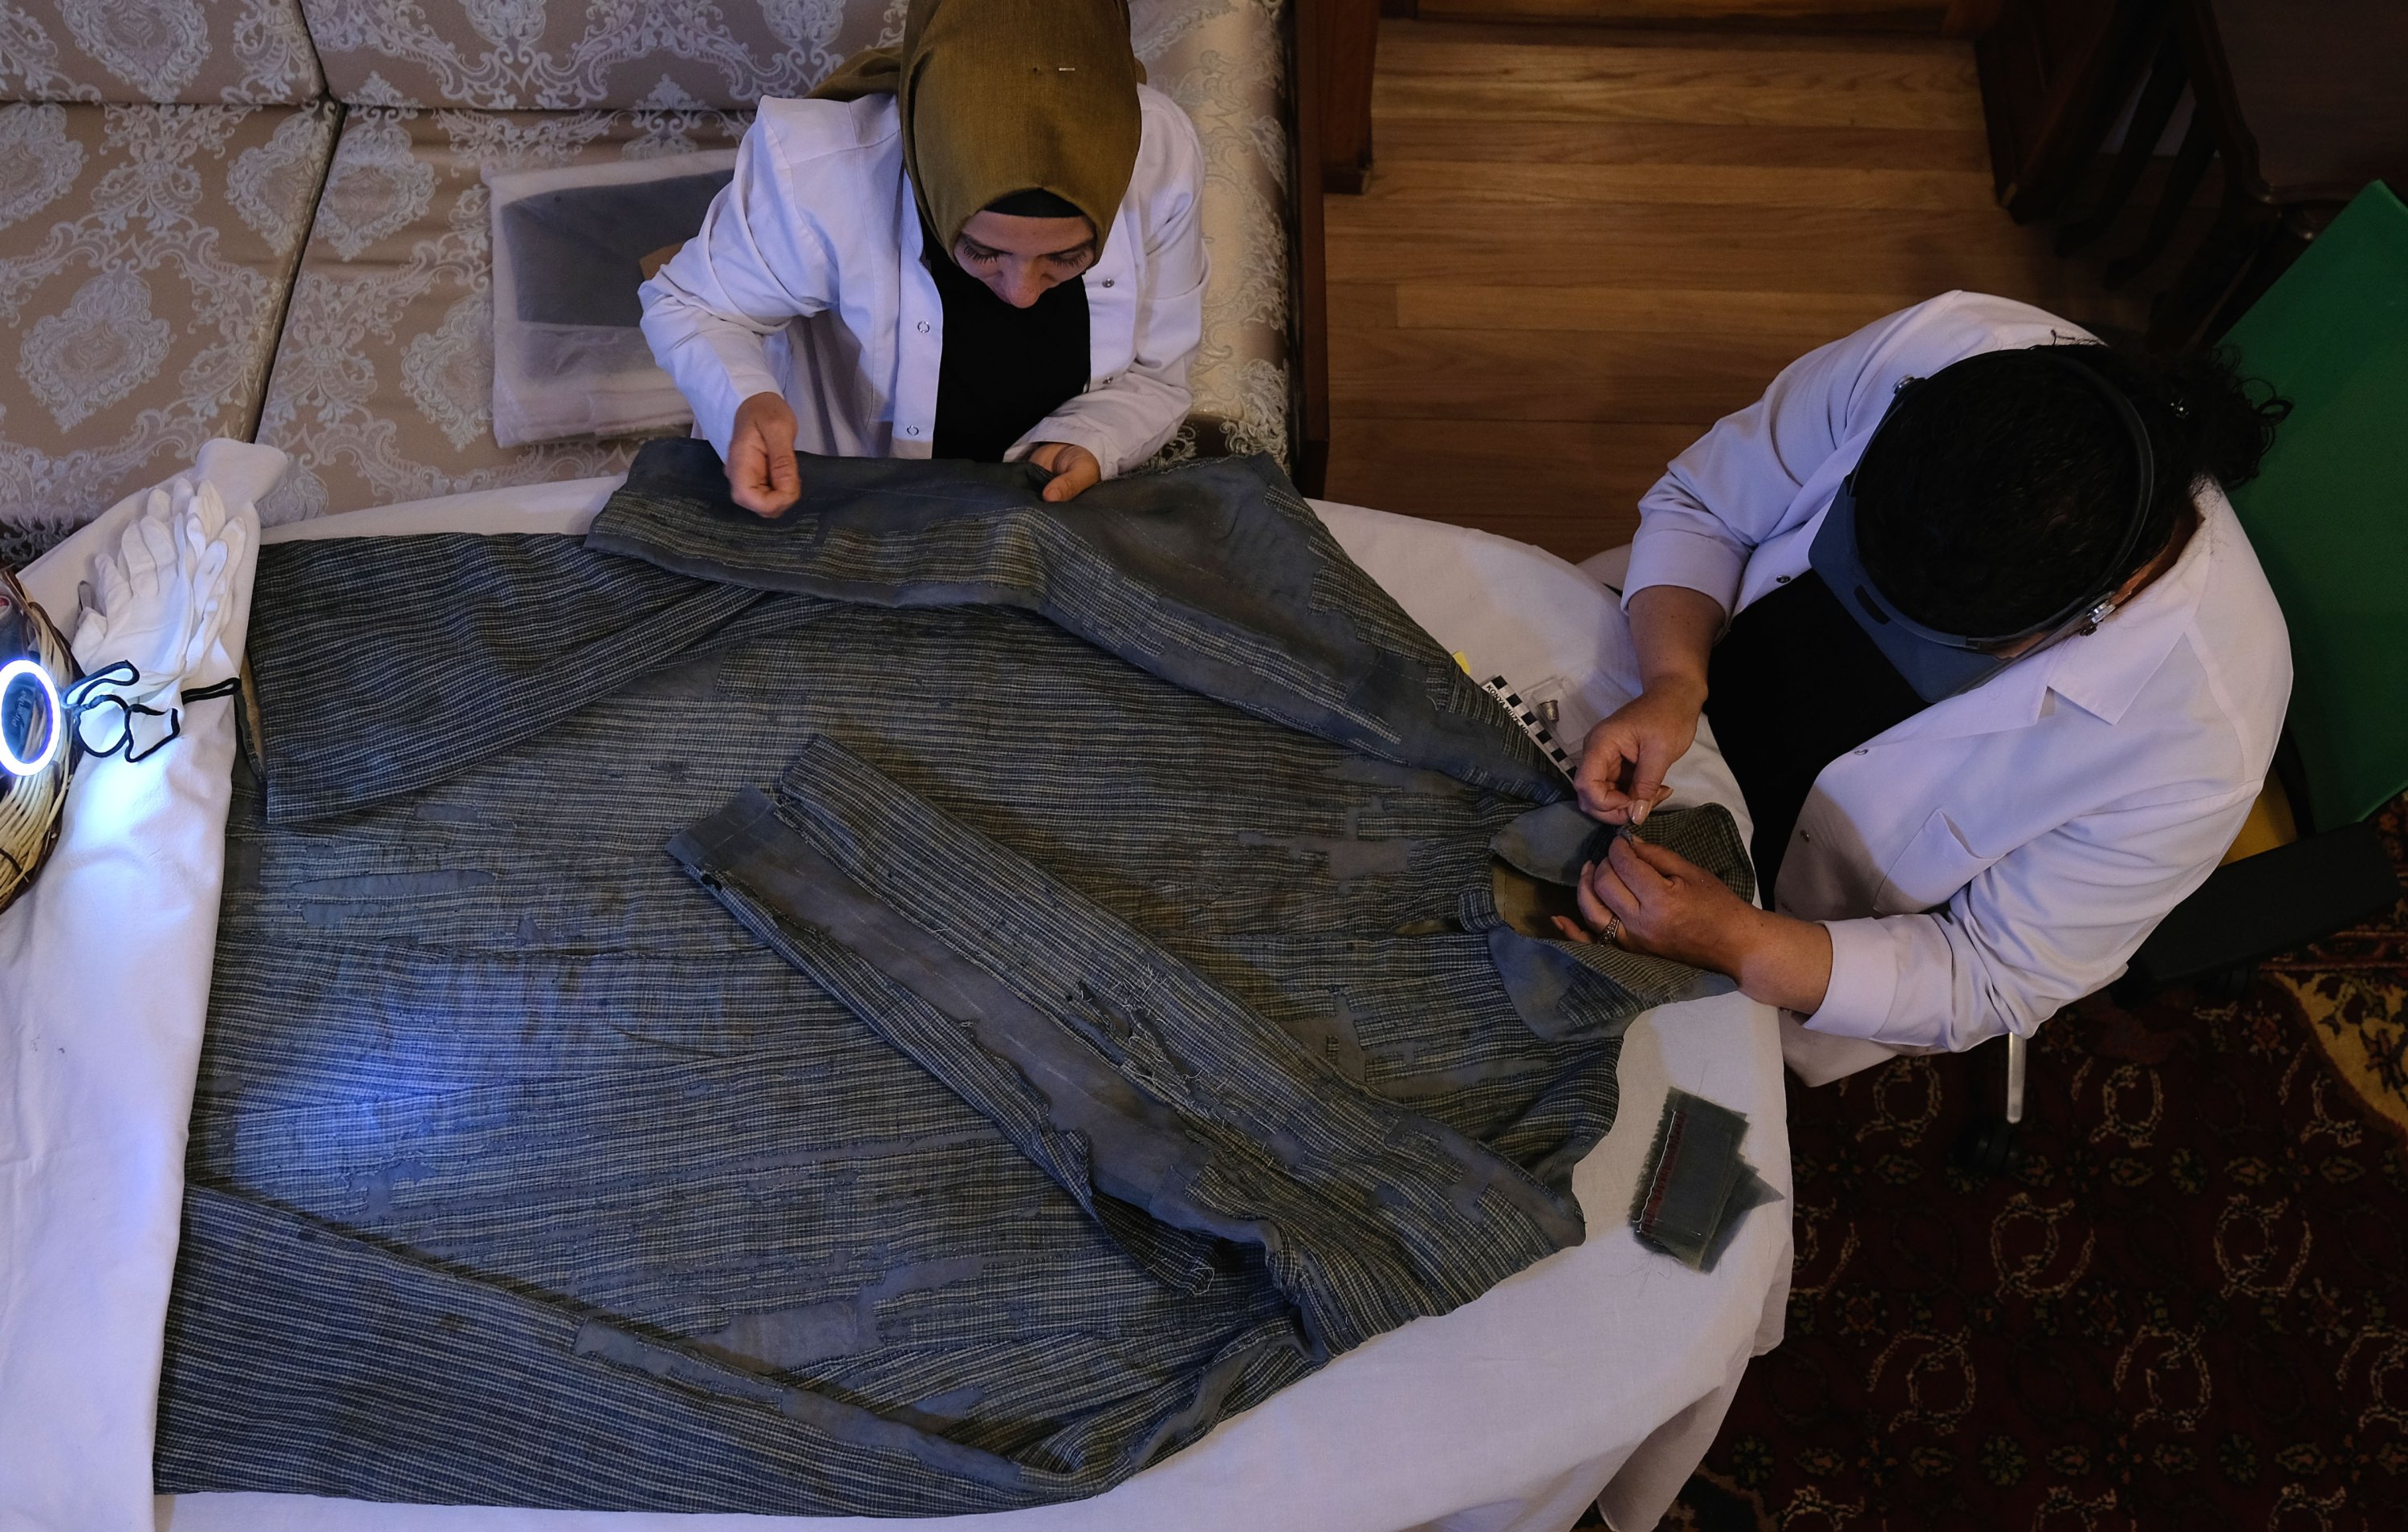 The clothes of Mevlana Jalaluddin Rumi kept in special boxes for years have come to light for restoration work, Konya, Turkey, June 18, 2022. (DHA Photo)